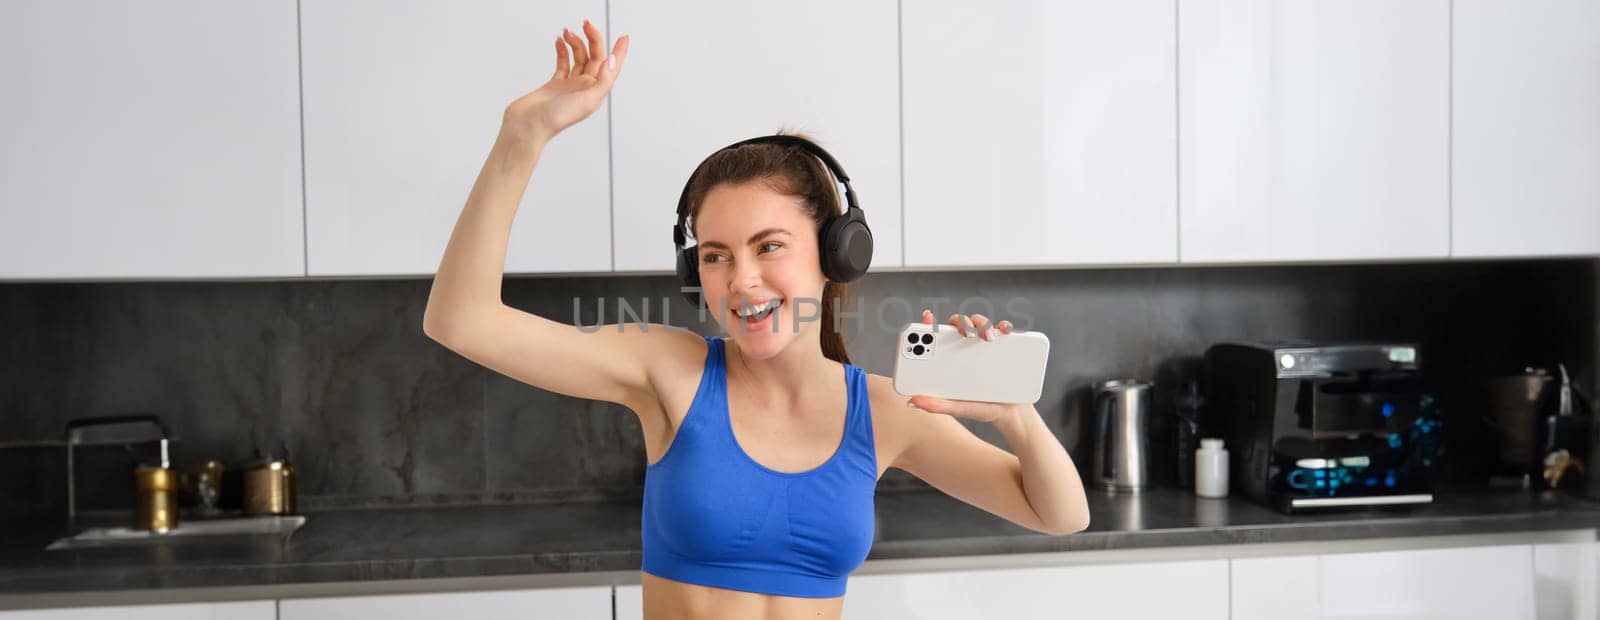 Portrait of beautiful sports woman, wearing activewear, dancing in kitchen with headphones, listening music and having fun, feeling energy after workout session.